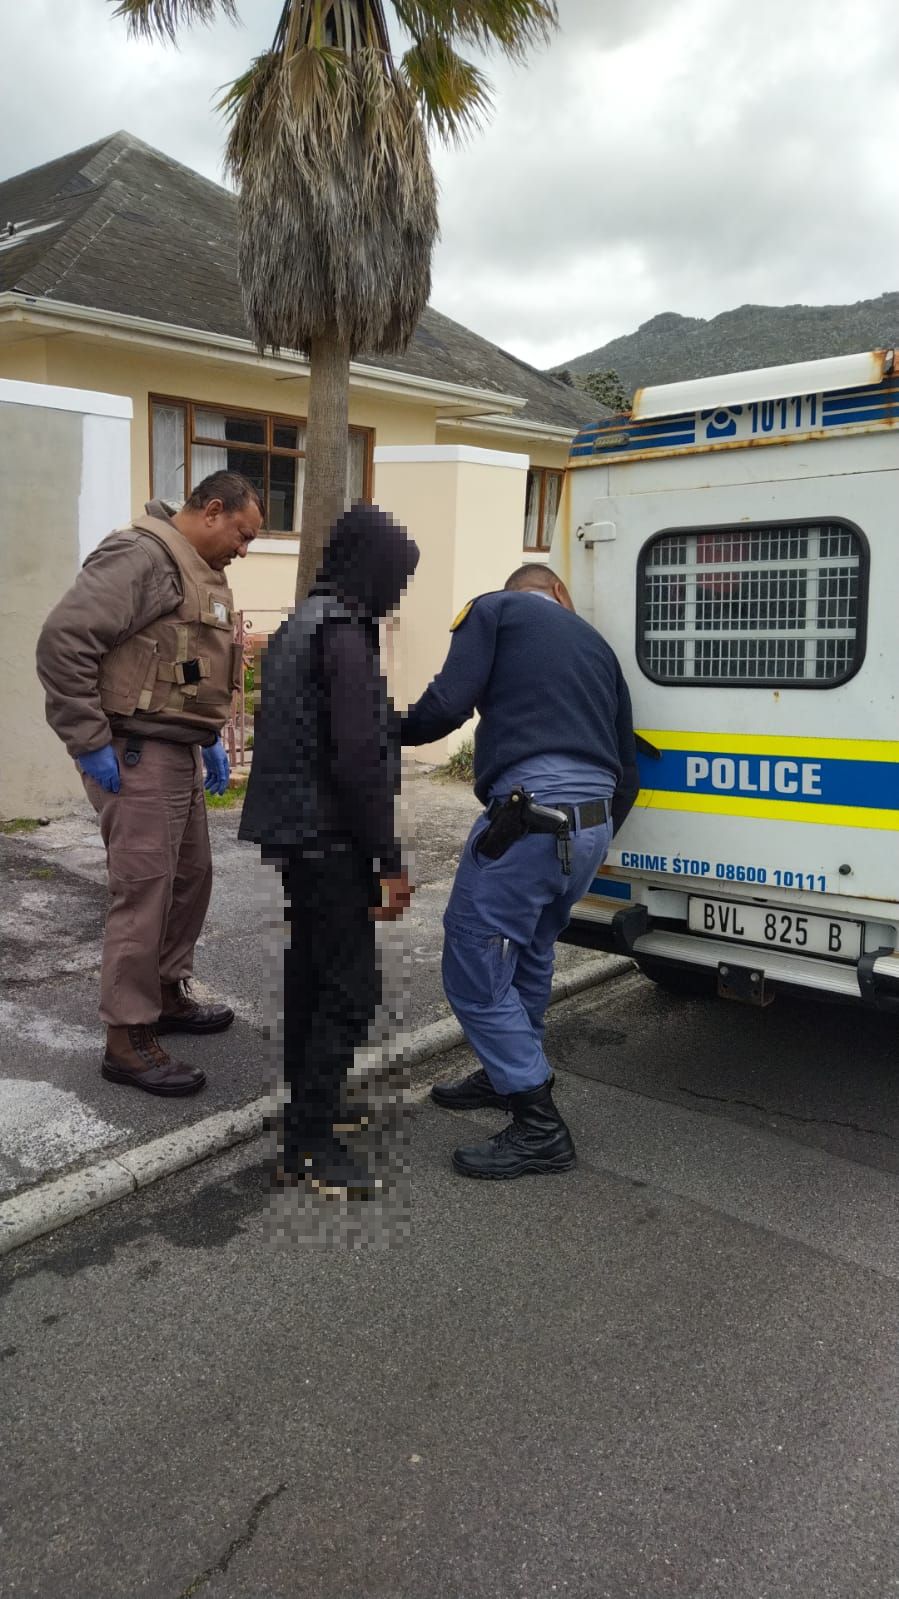 A suspect was arrested for possession of drugs in the Fish Hoek area